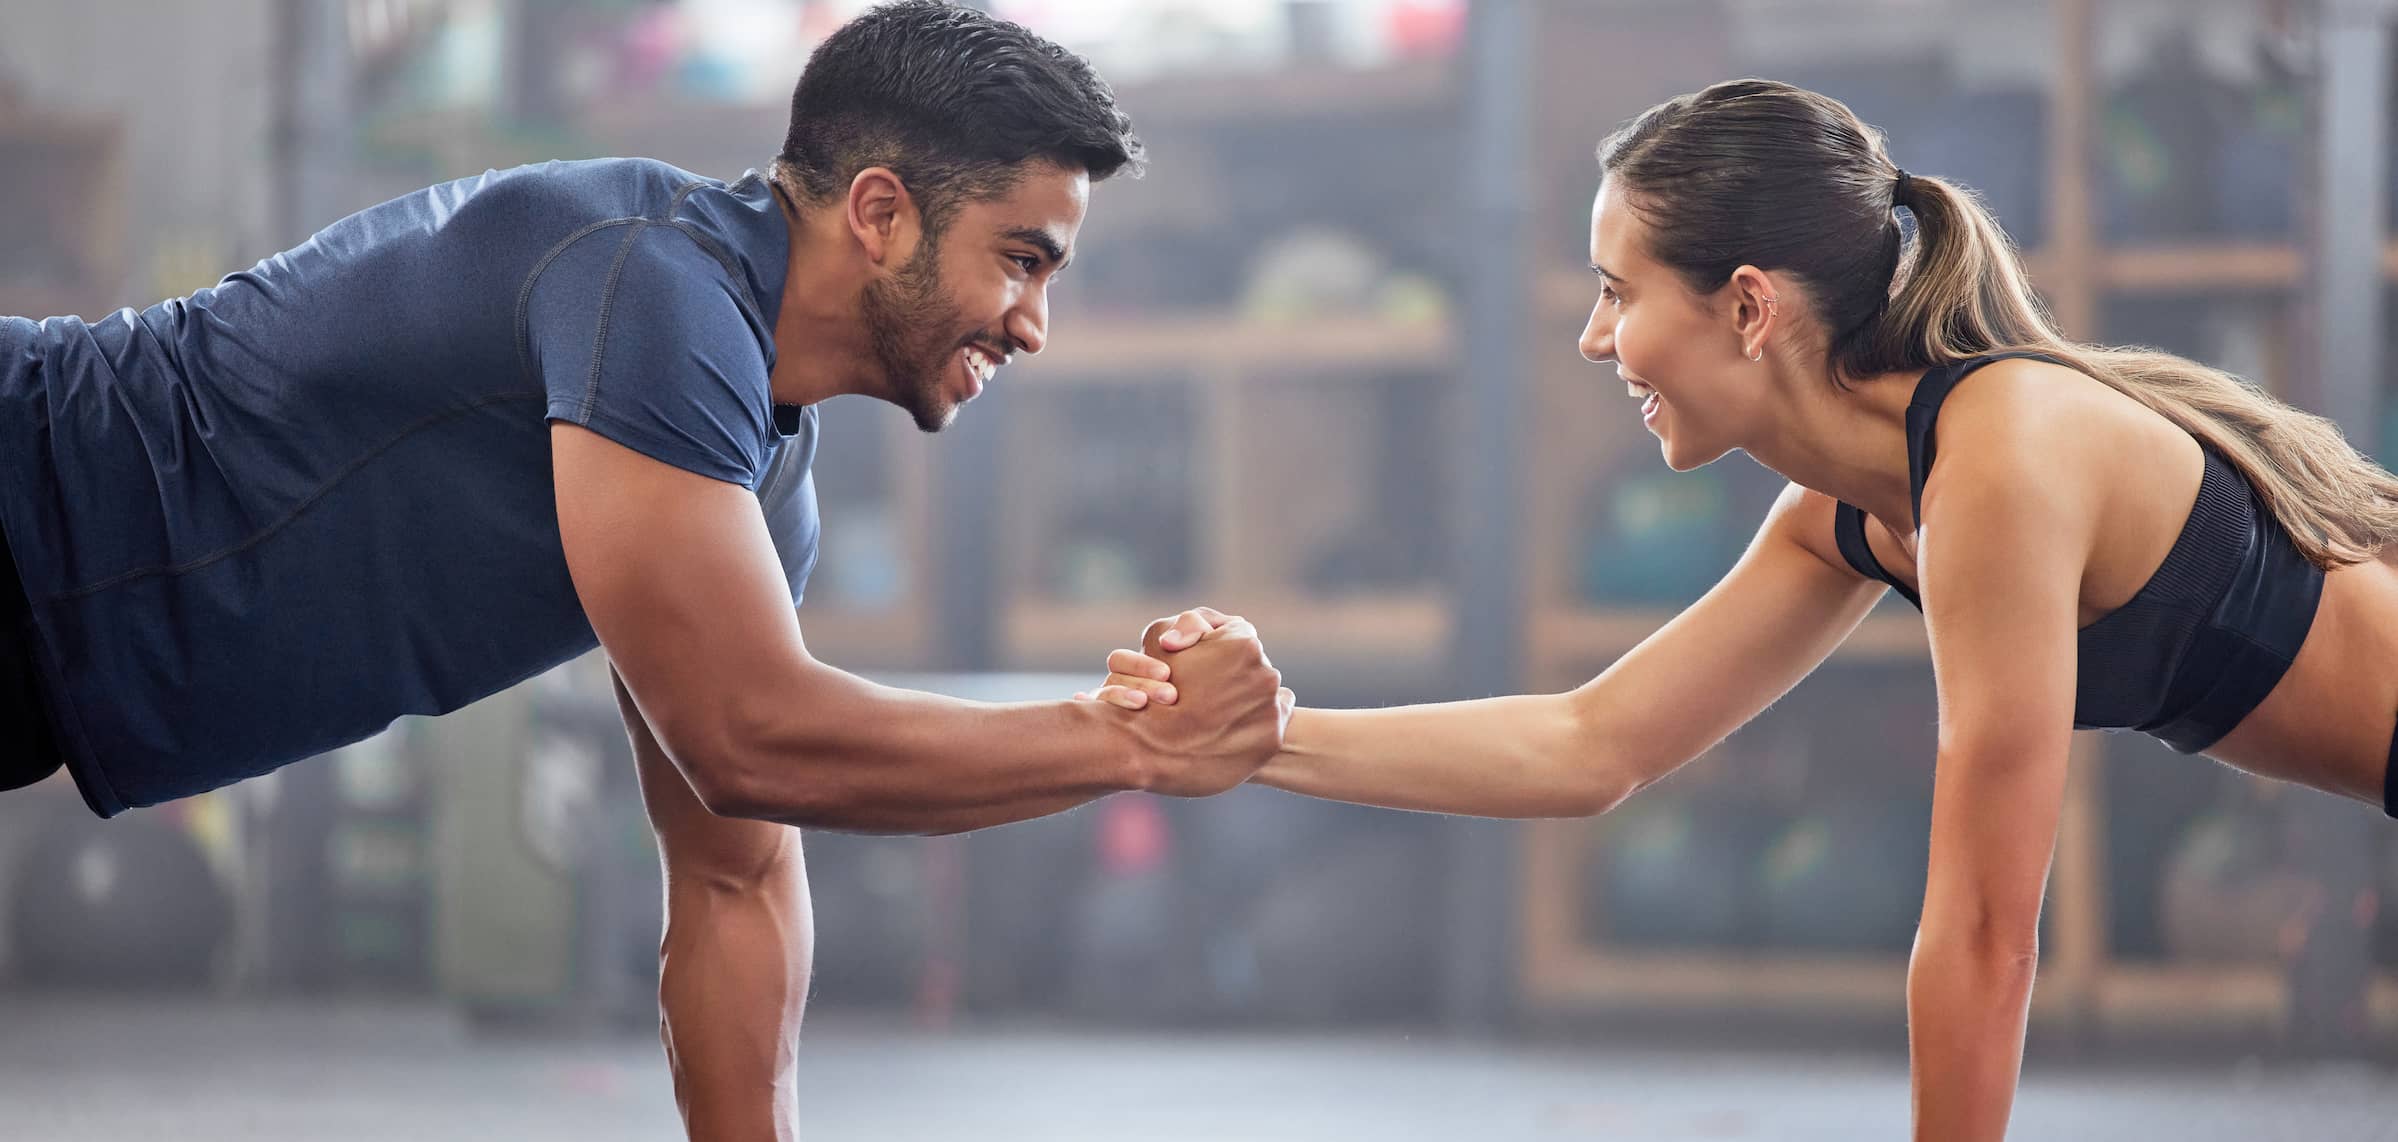 Fitness couple workout training